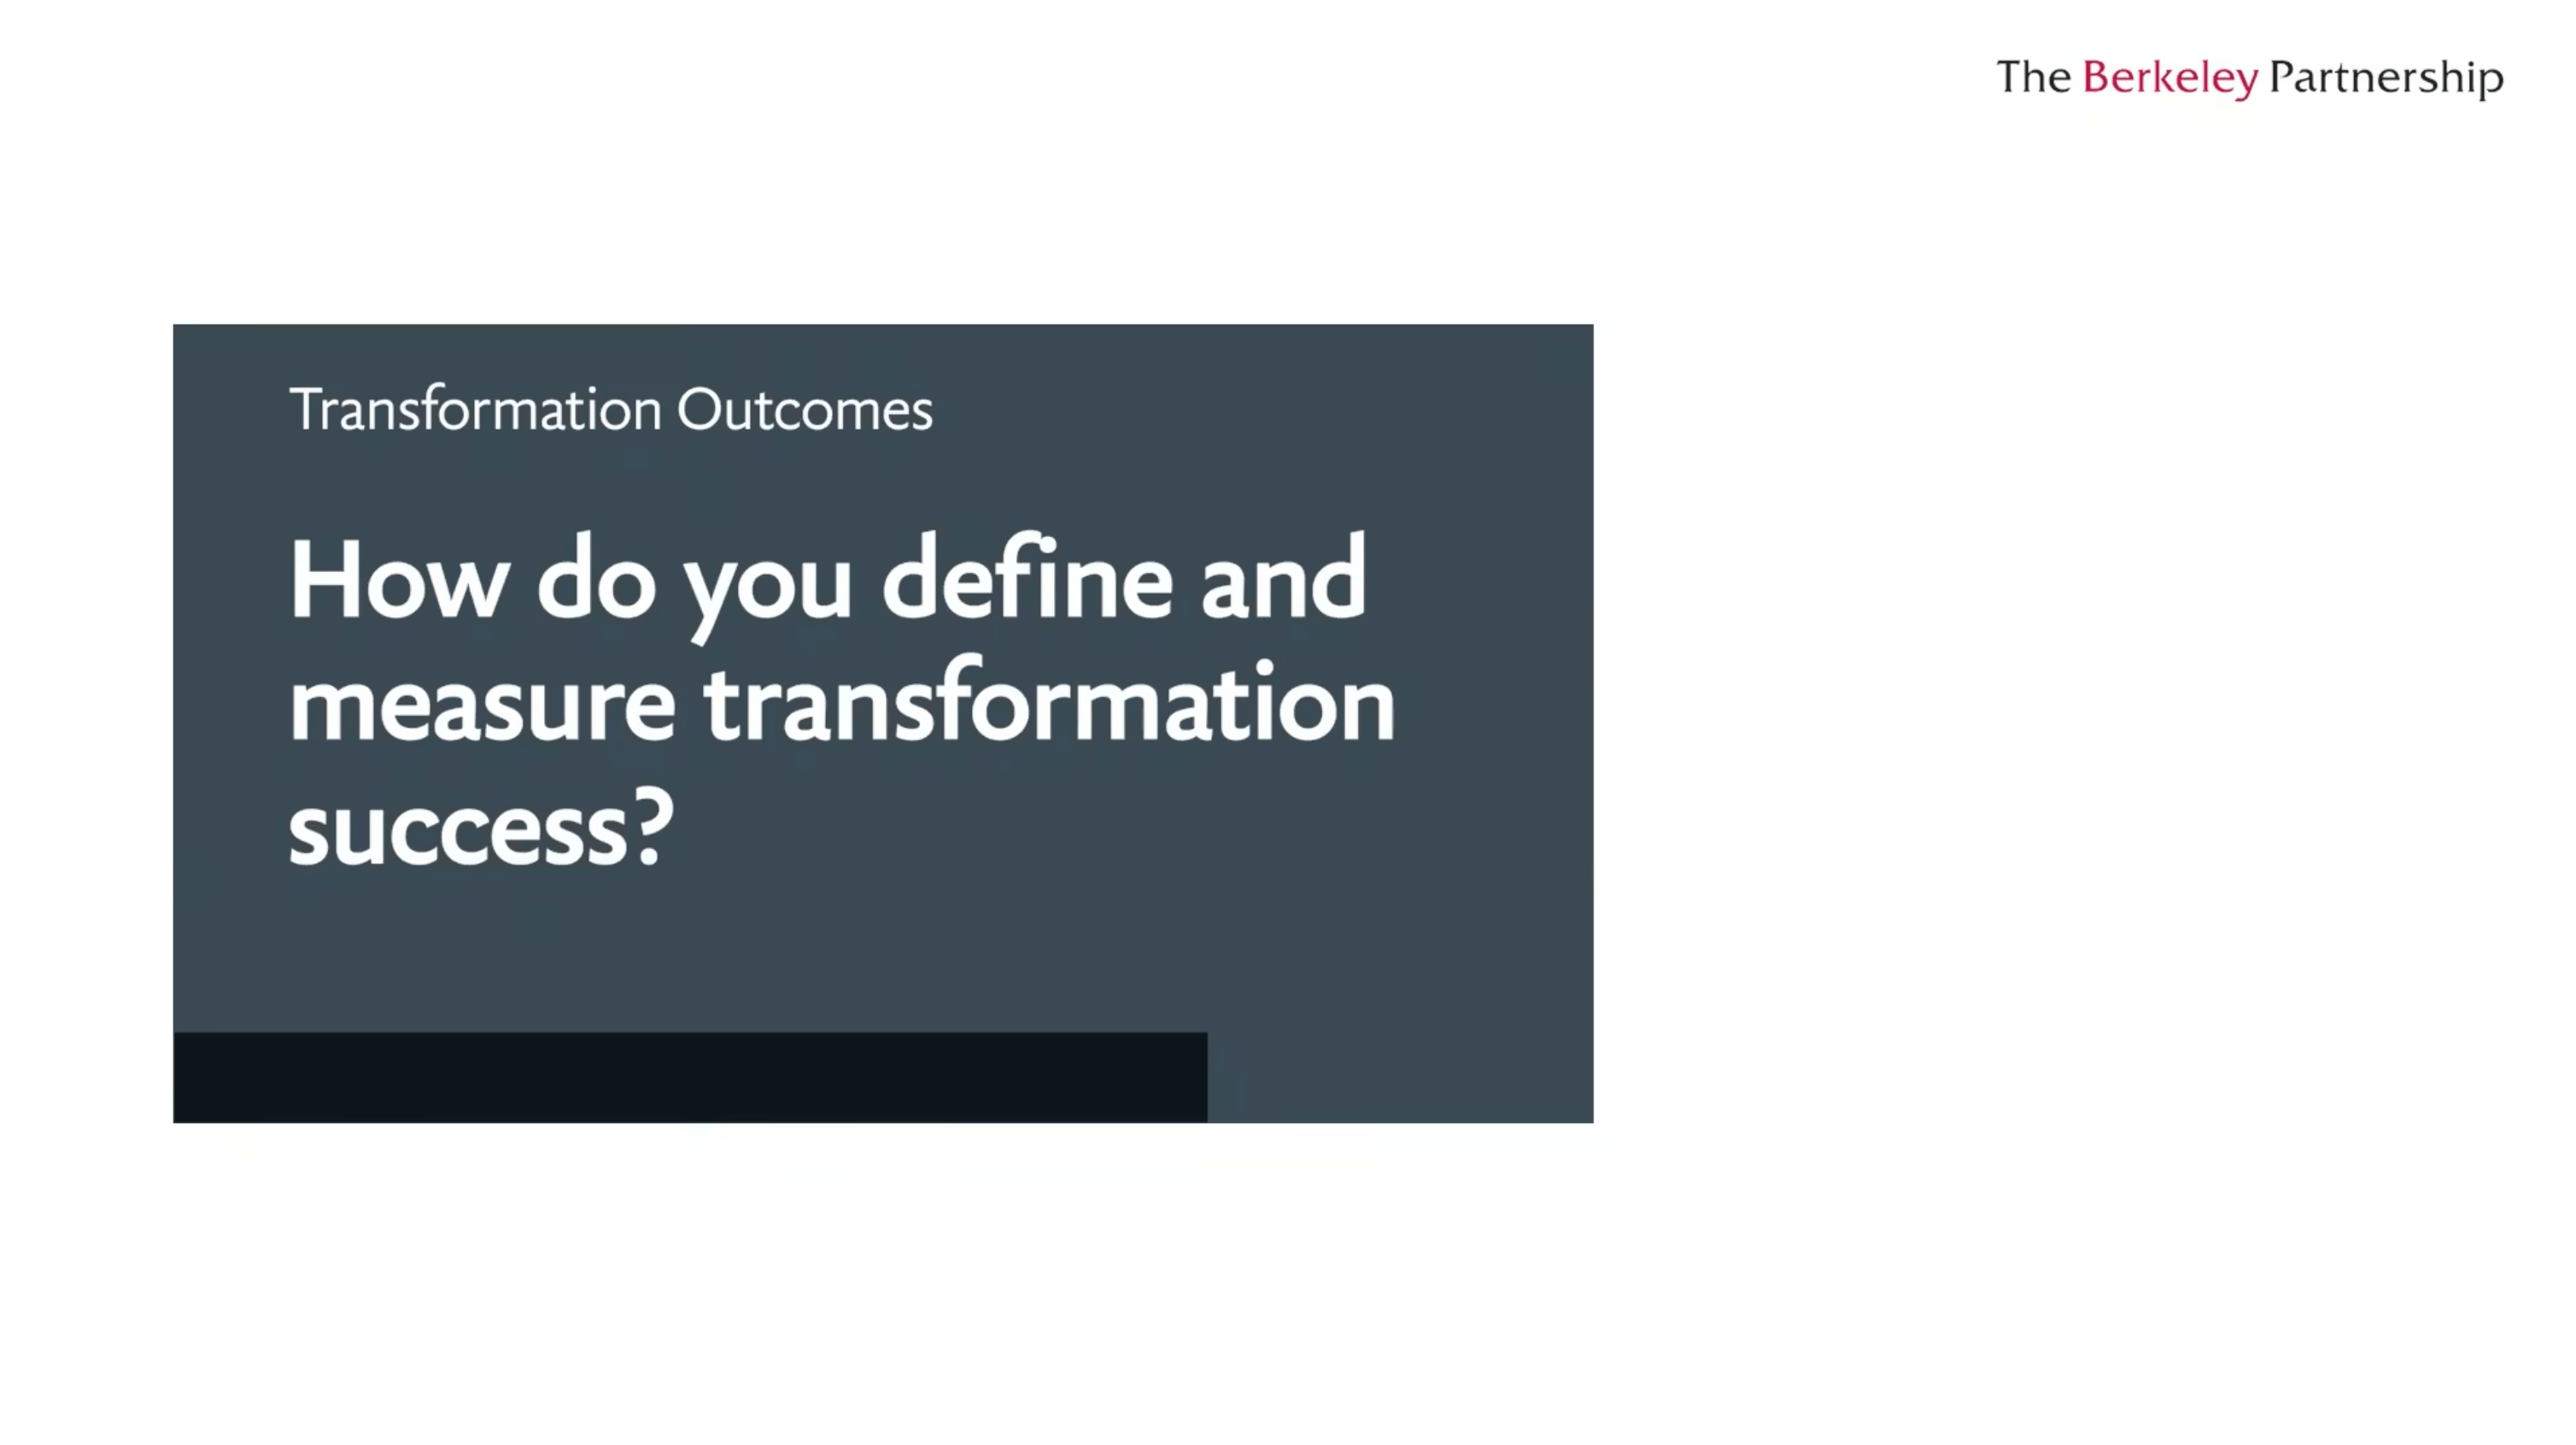 Transformation outcomes: How do you define and measure transformation success?